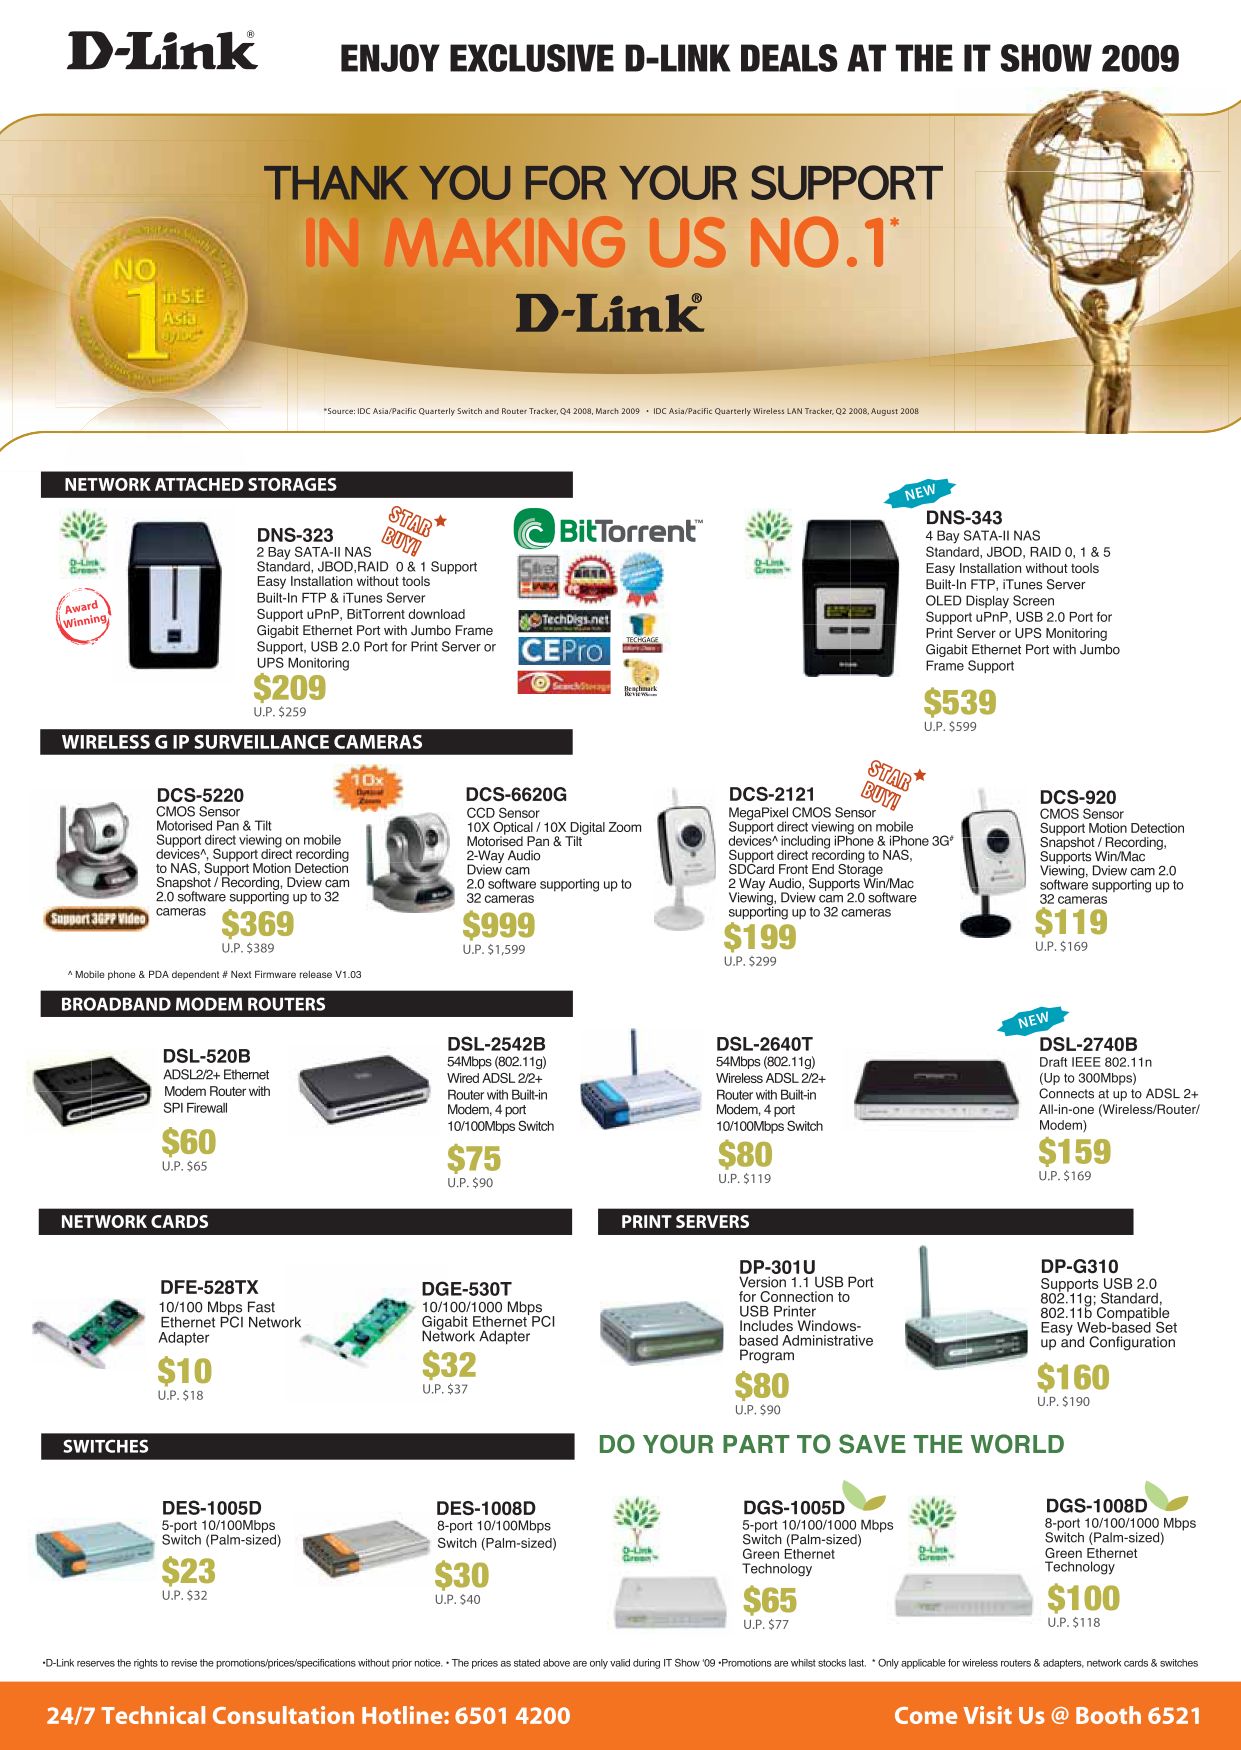 IT Show 2009 price list image brochure of D-Link NAS Router Modem Network Cards Switches Print Servers P2